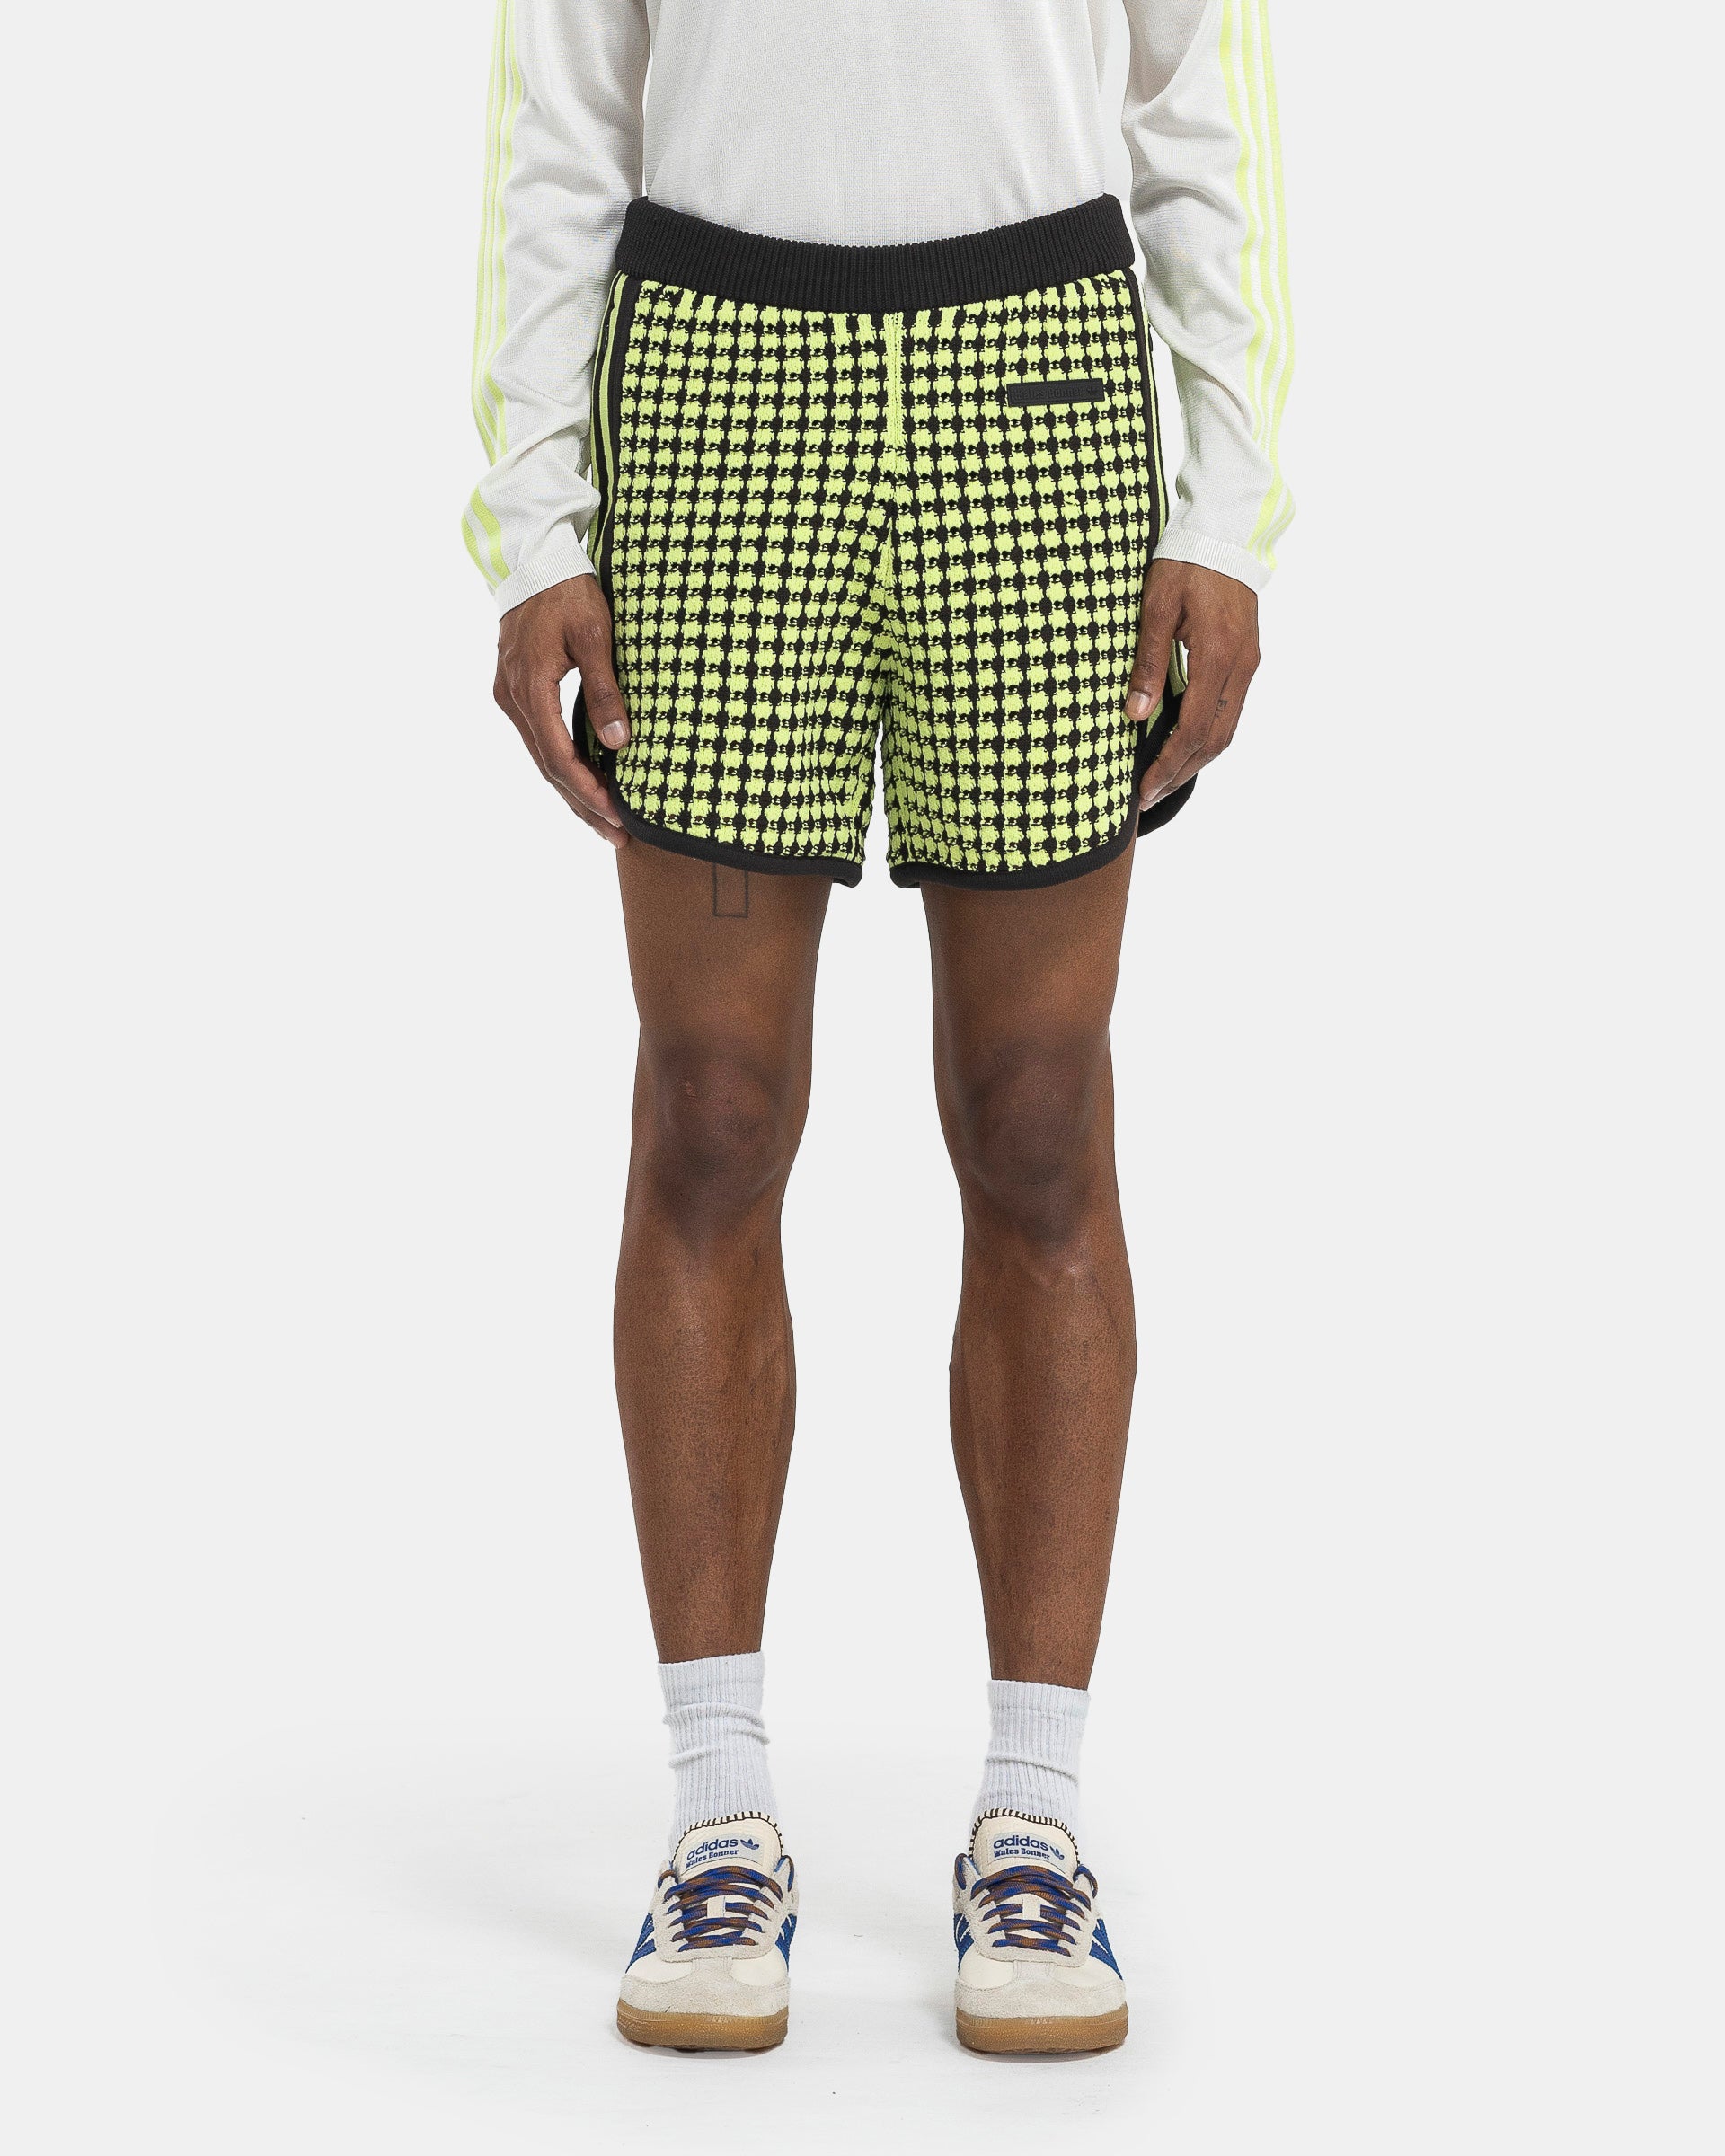 Model wearing Adidas Wales Bonner Crochet Shorts in Semi on the white background